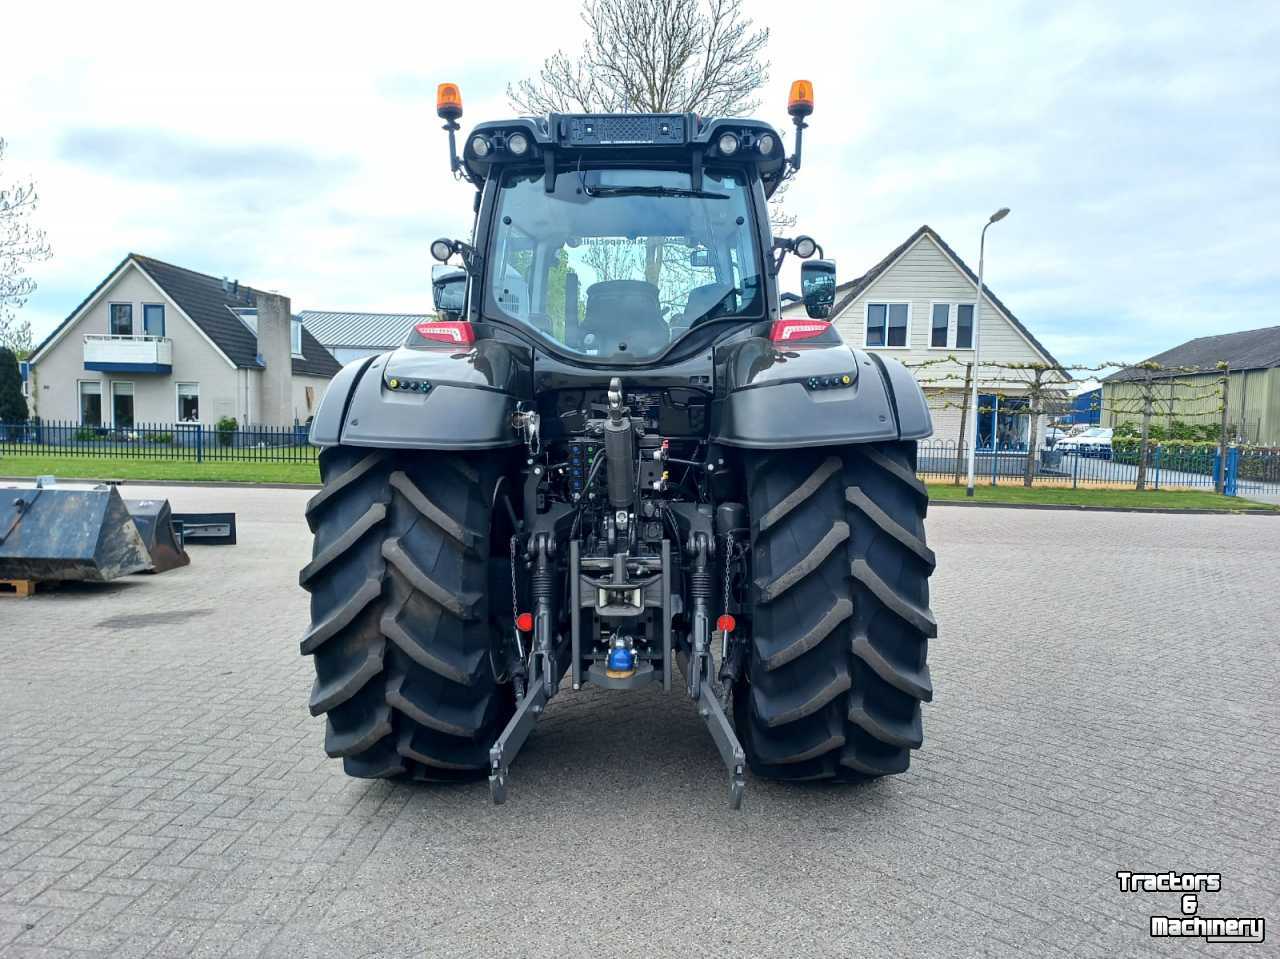 Tracteurs Valtra T174 Direct Smart Touch GPS, 2021, 450 uur!